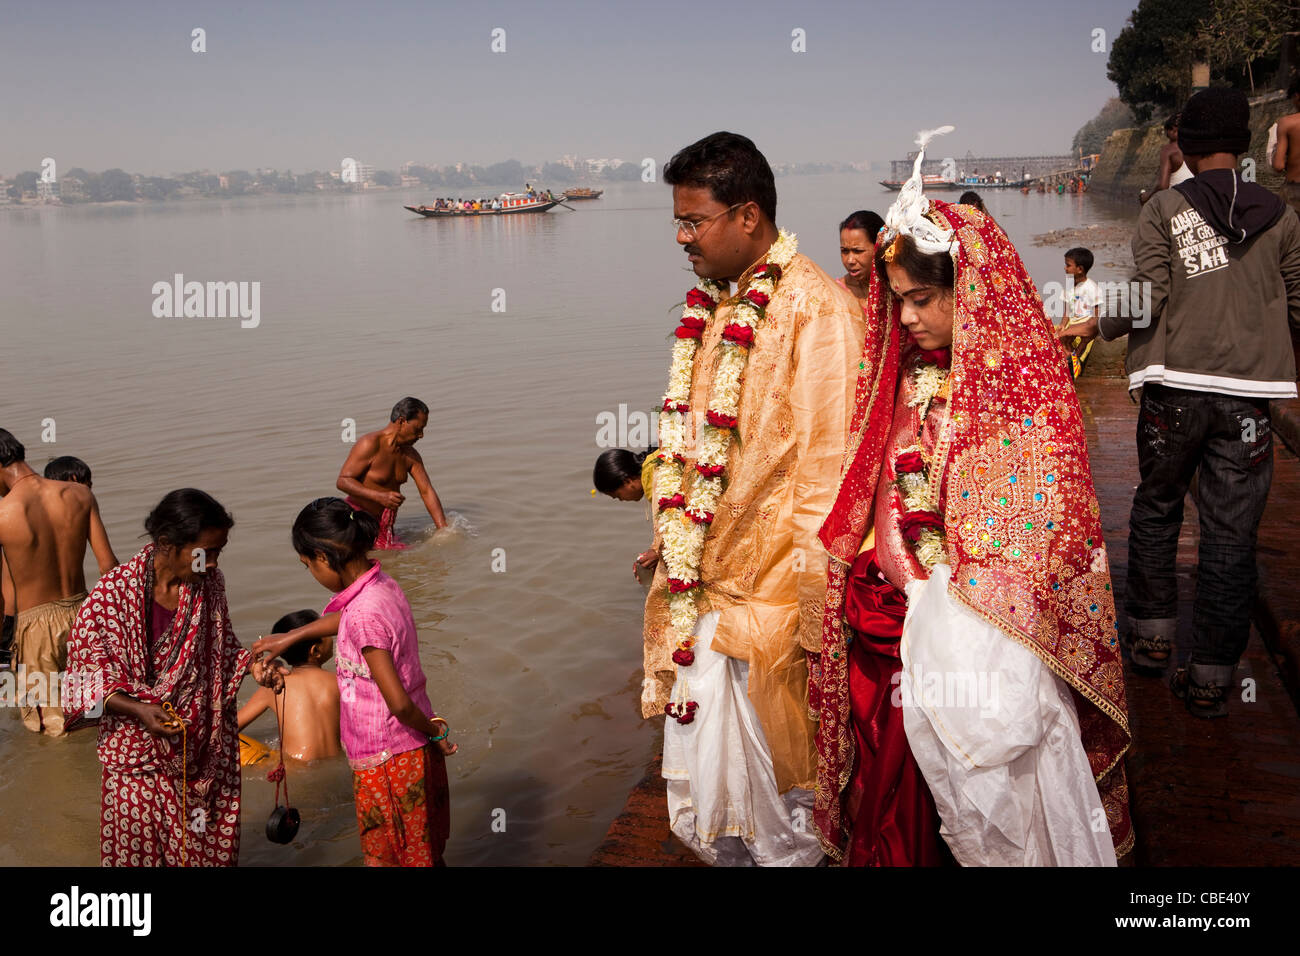 India, West Bengal, Kolkata, Dakshineswar Kali Temple newly married couple on River Hooghly ghat Stock Photo